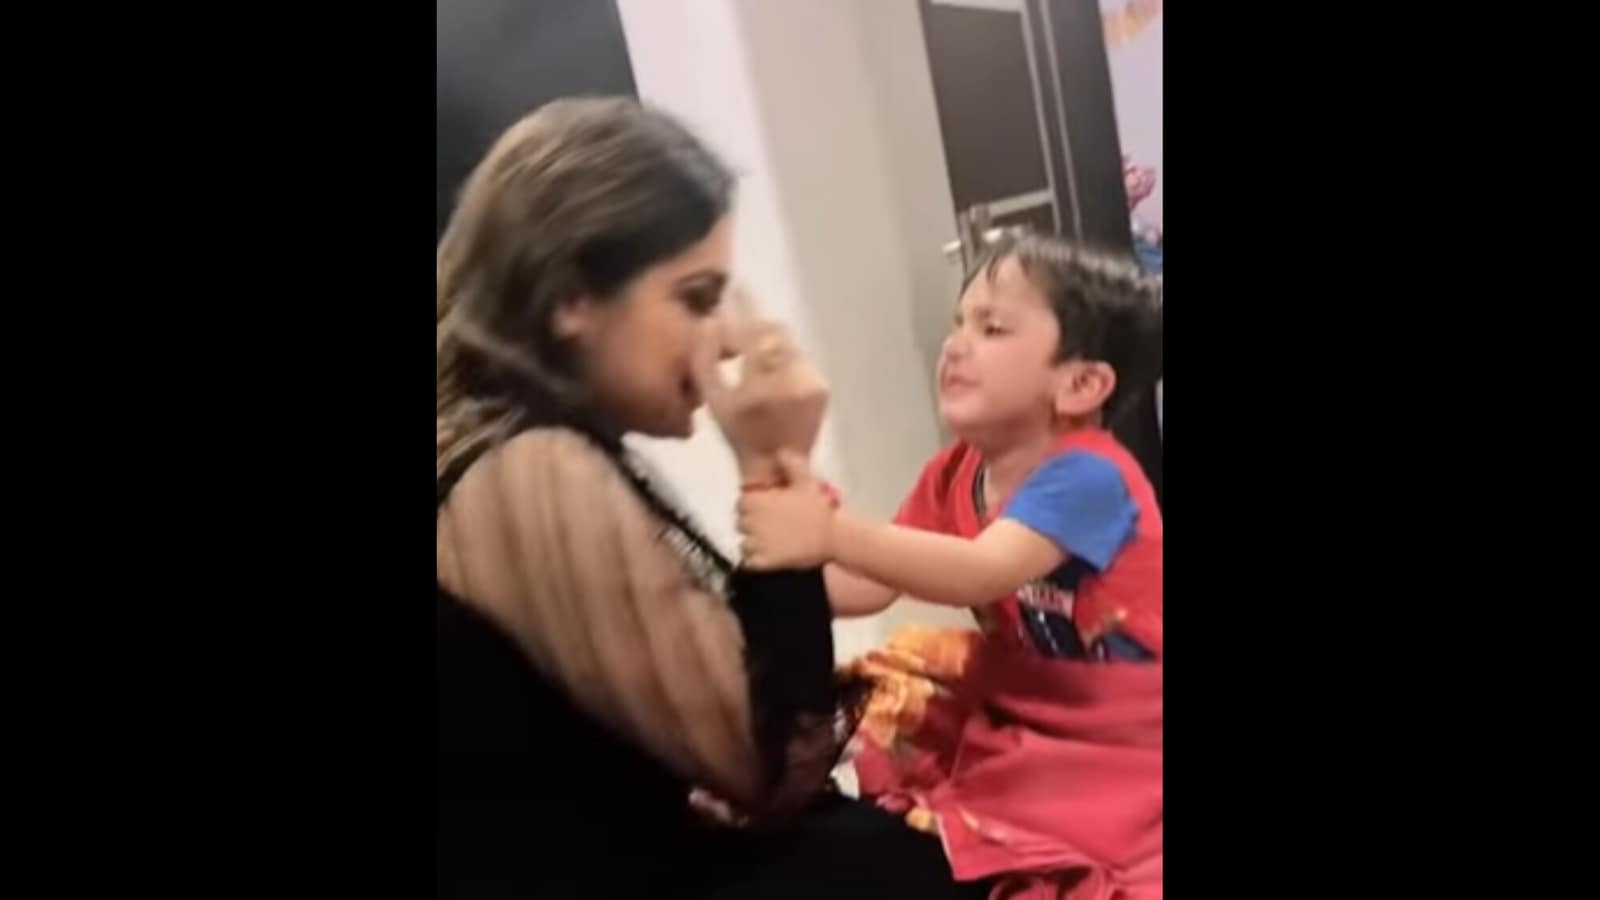 Kid thinks mom’s fake eyelashes will hurt her, gets emotional. Watch viral video